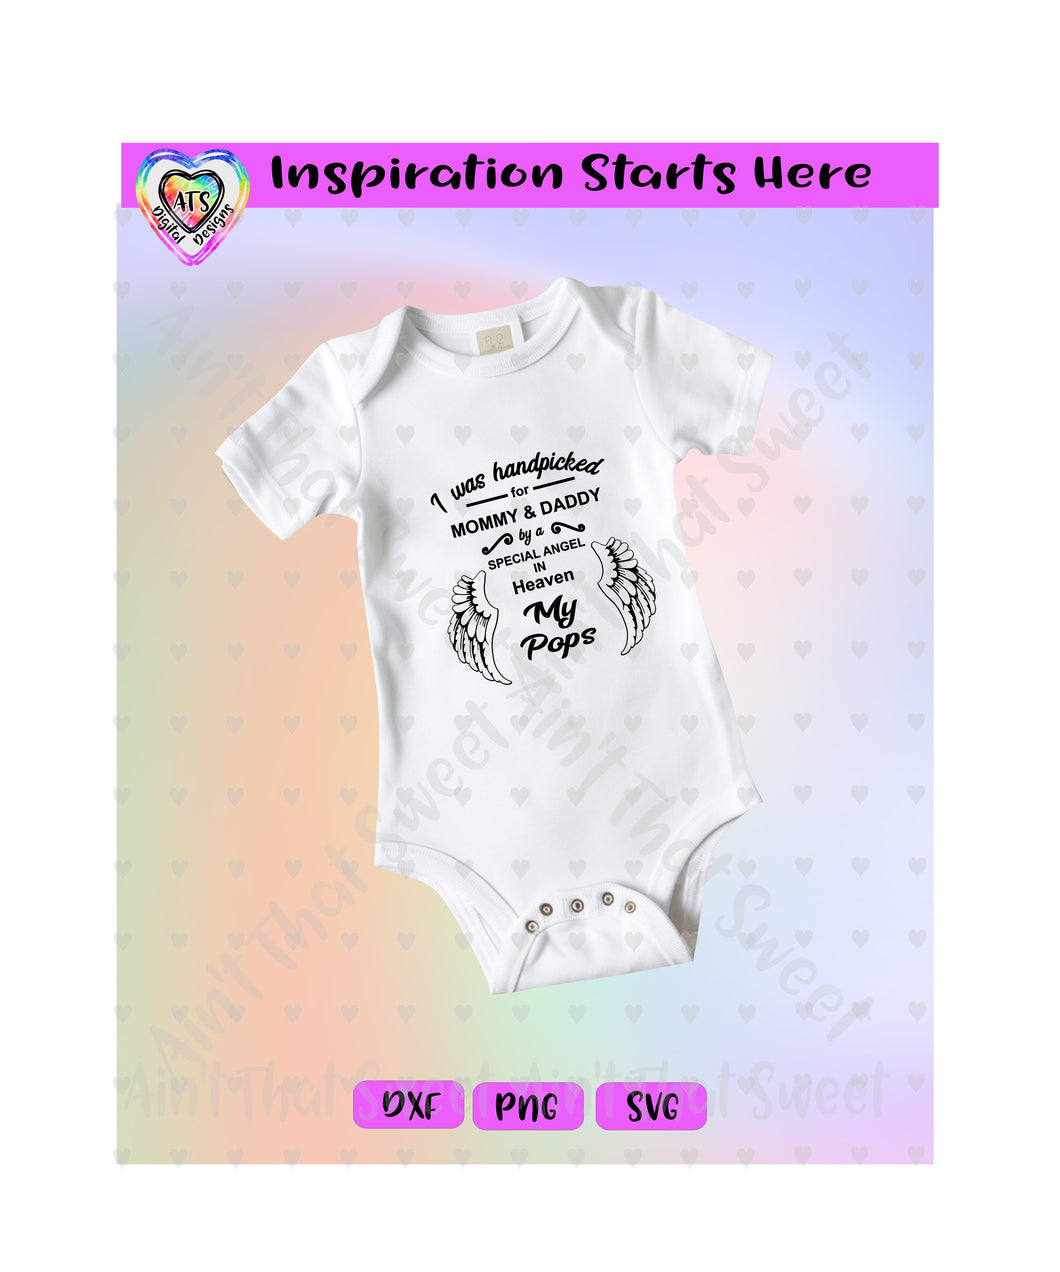 I Was Handpicked For Mommy & Daddy By A Special Angel - My Pops | Wings - Transparent PNG, SVG, DXF  - Silhouette, Cricut, Scan N Cut